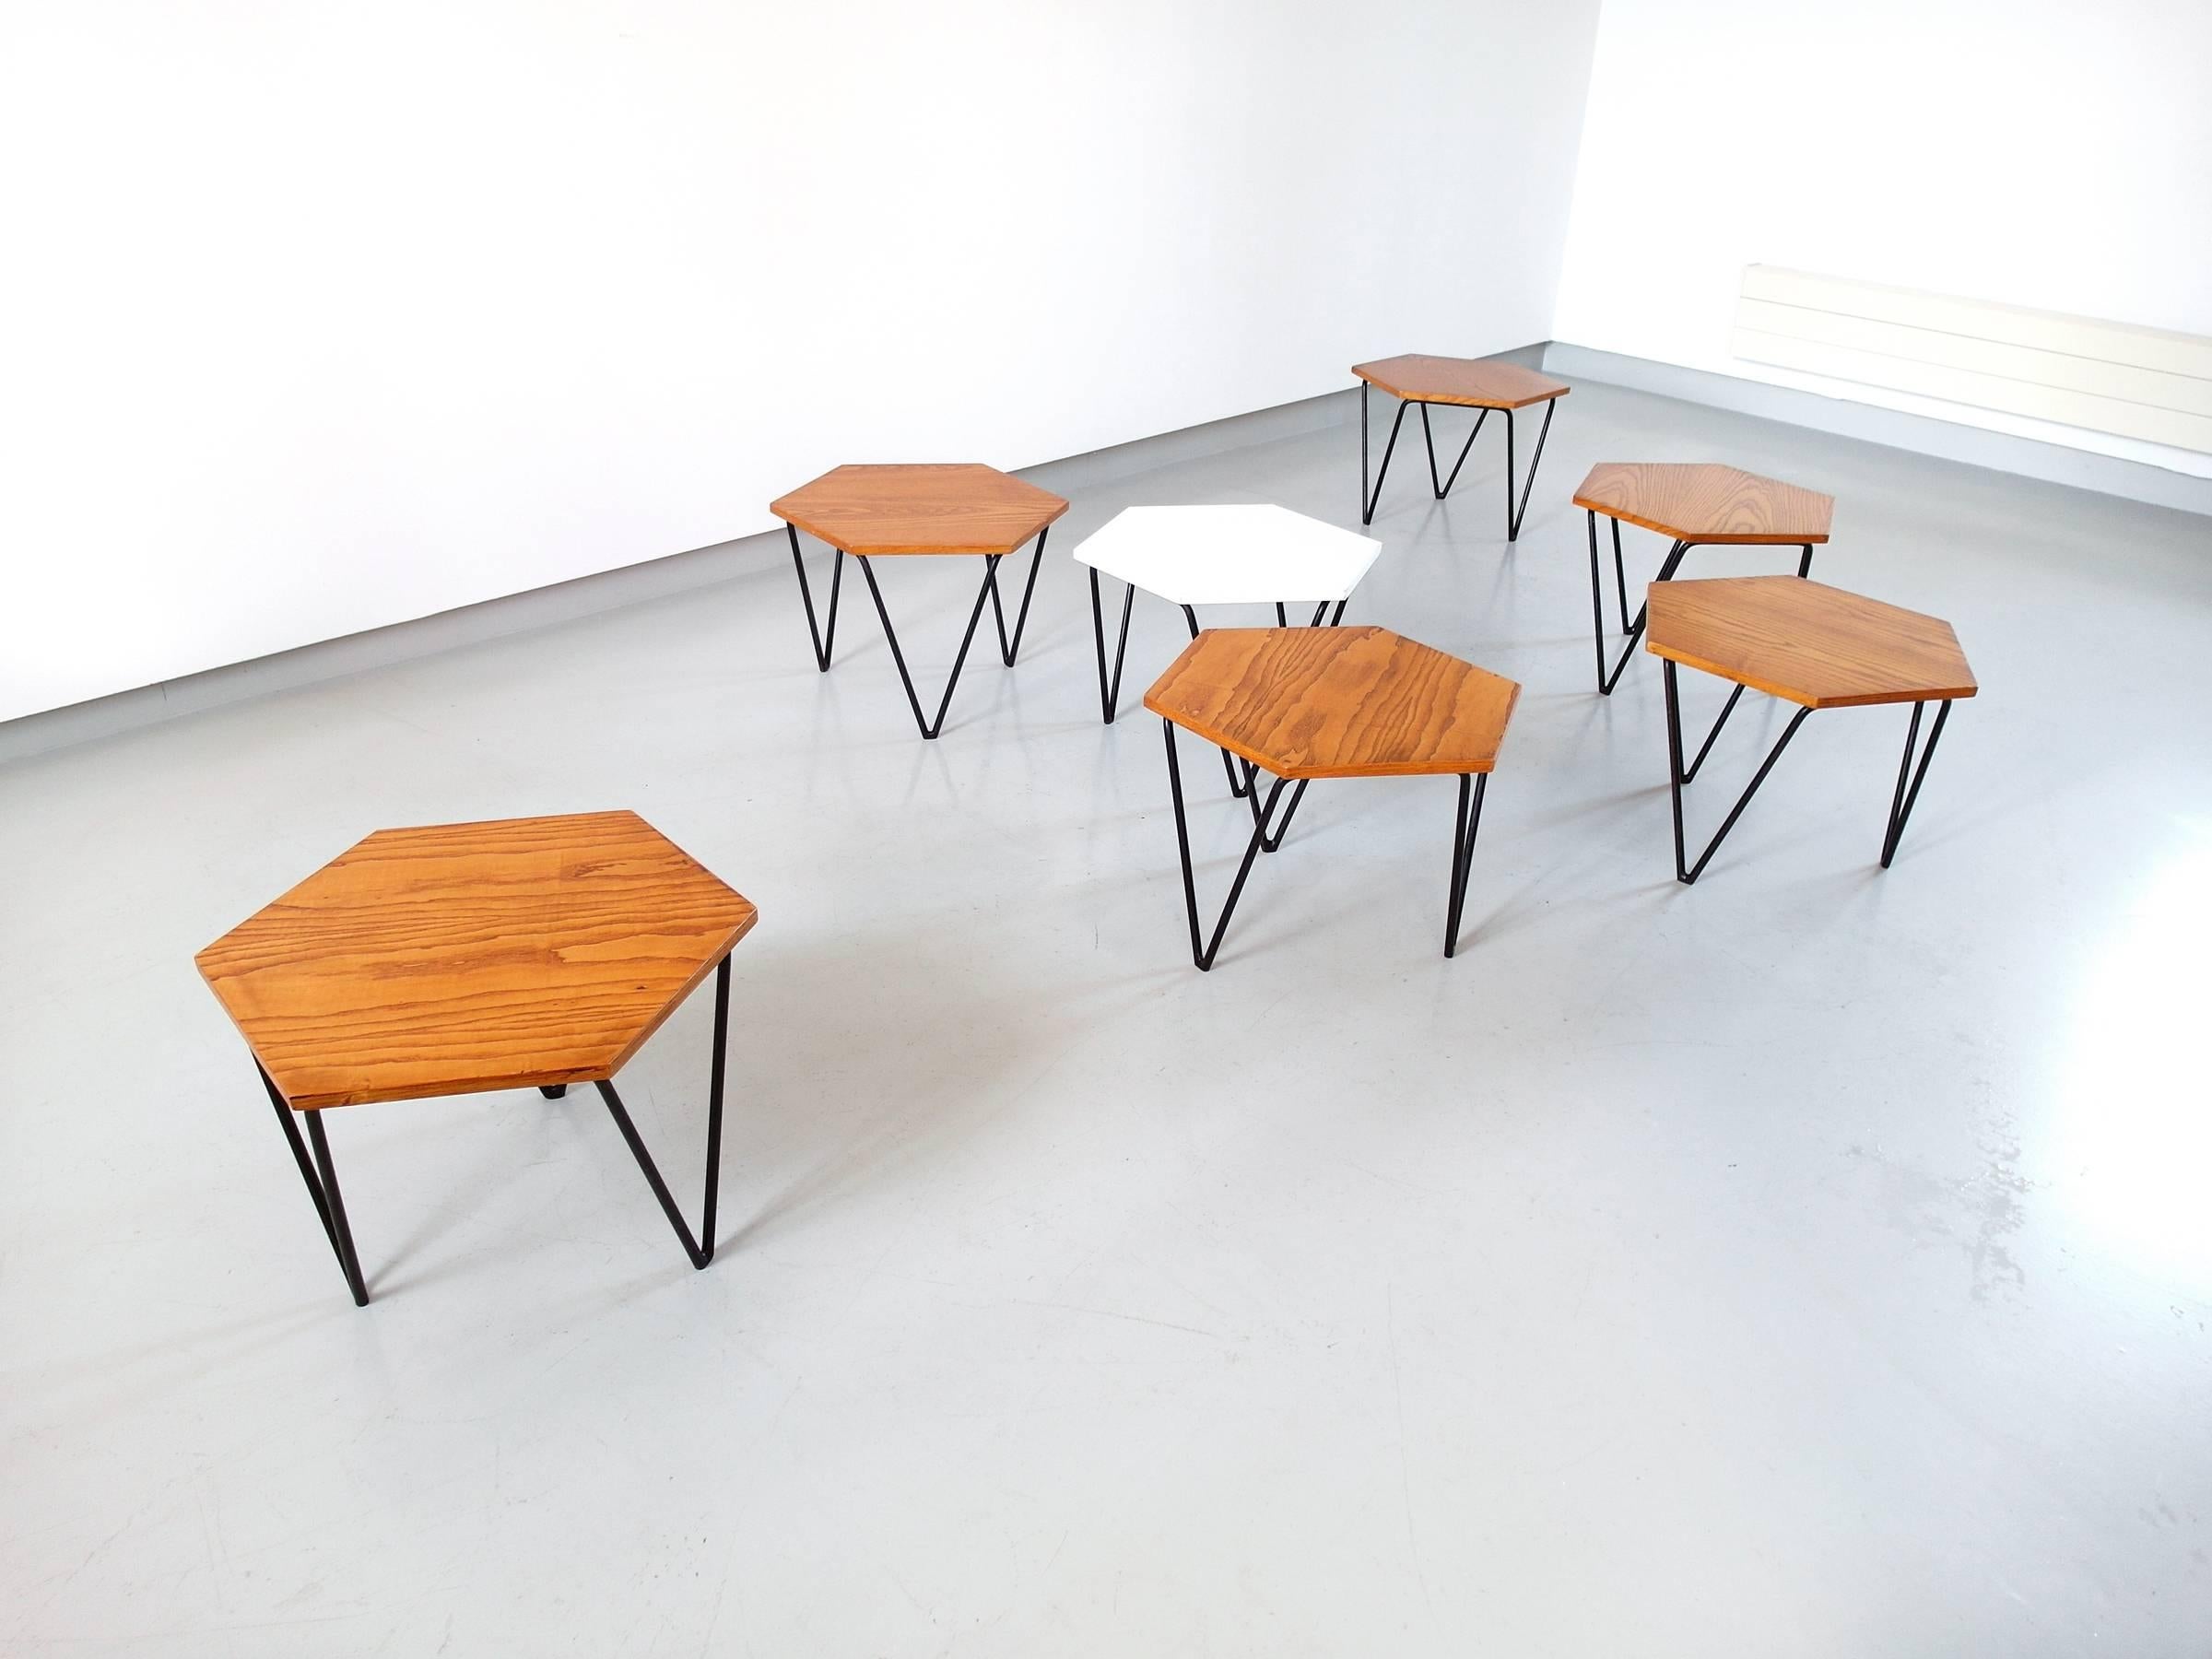 Mid-20th Century Gio Ponti Set of Seven Modular Coffee Tables for I.S.A., Italy, circa 1950